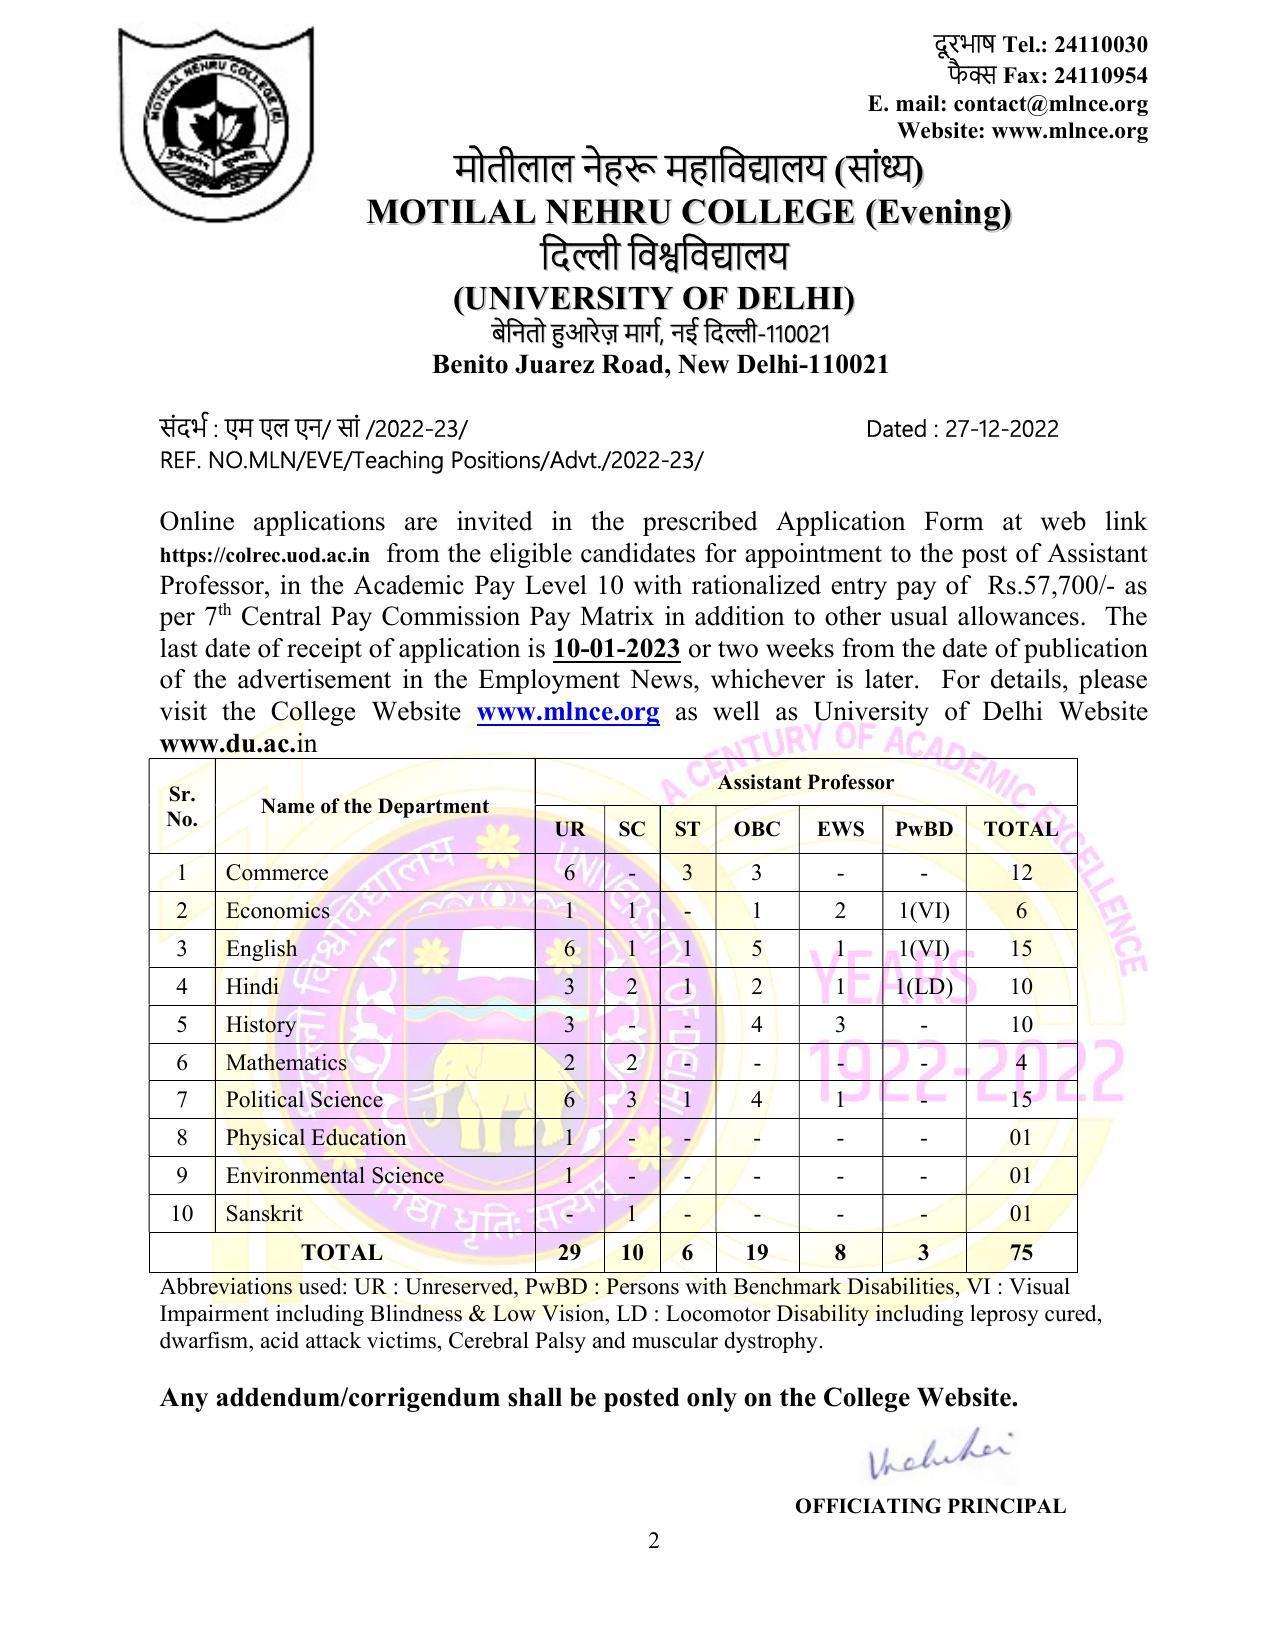 Motilal Nehru College (Evening) Invites Application for 75 Assistant Professor Recruitment 2022 - Page 2